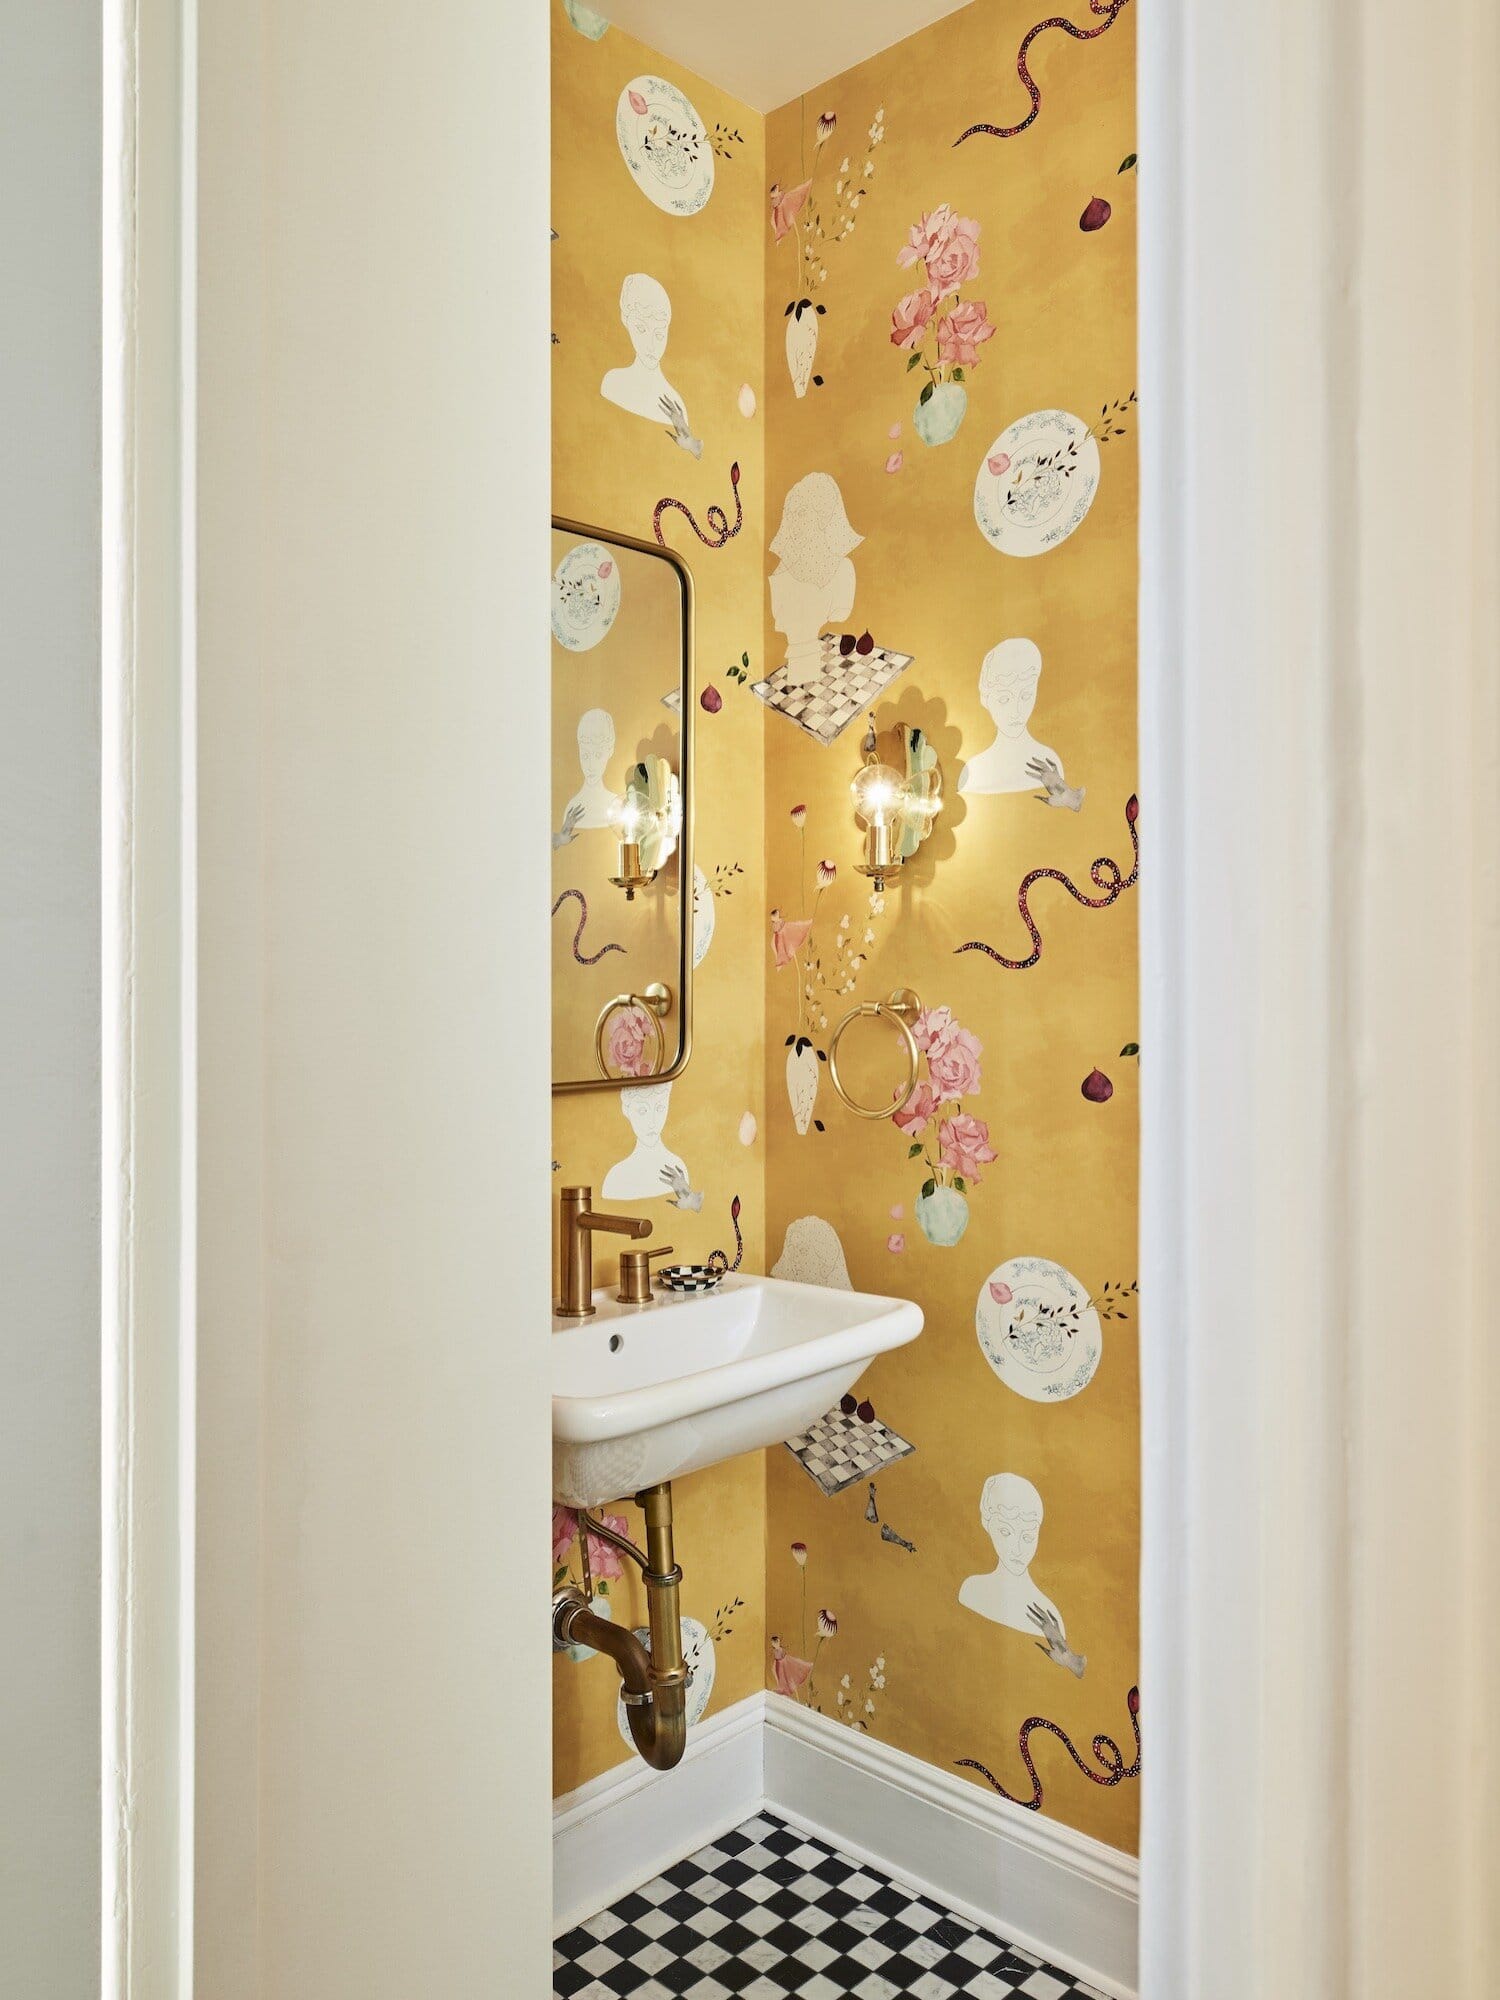 Powder room featuring colorful wallpaper as an example of Style Small Space Ideas